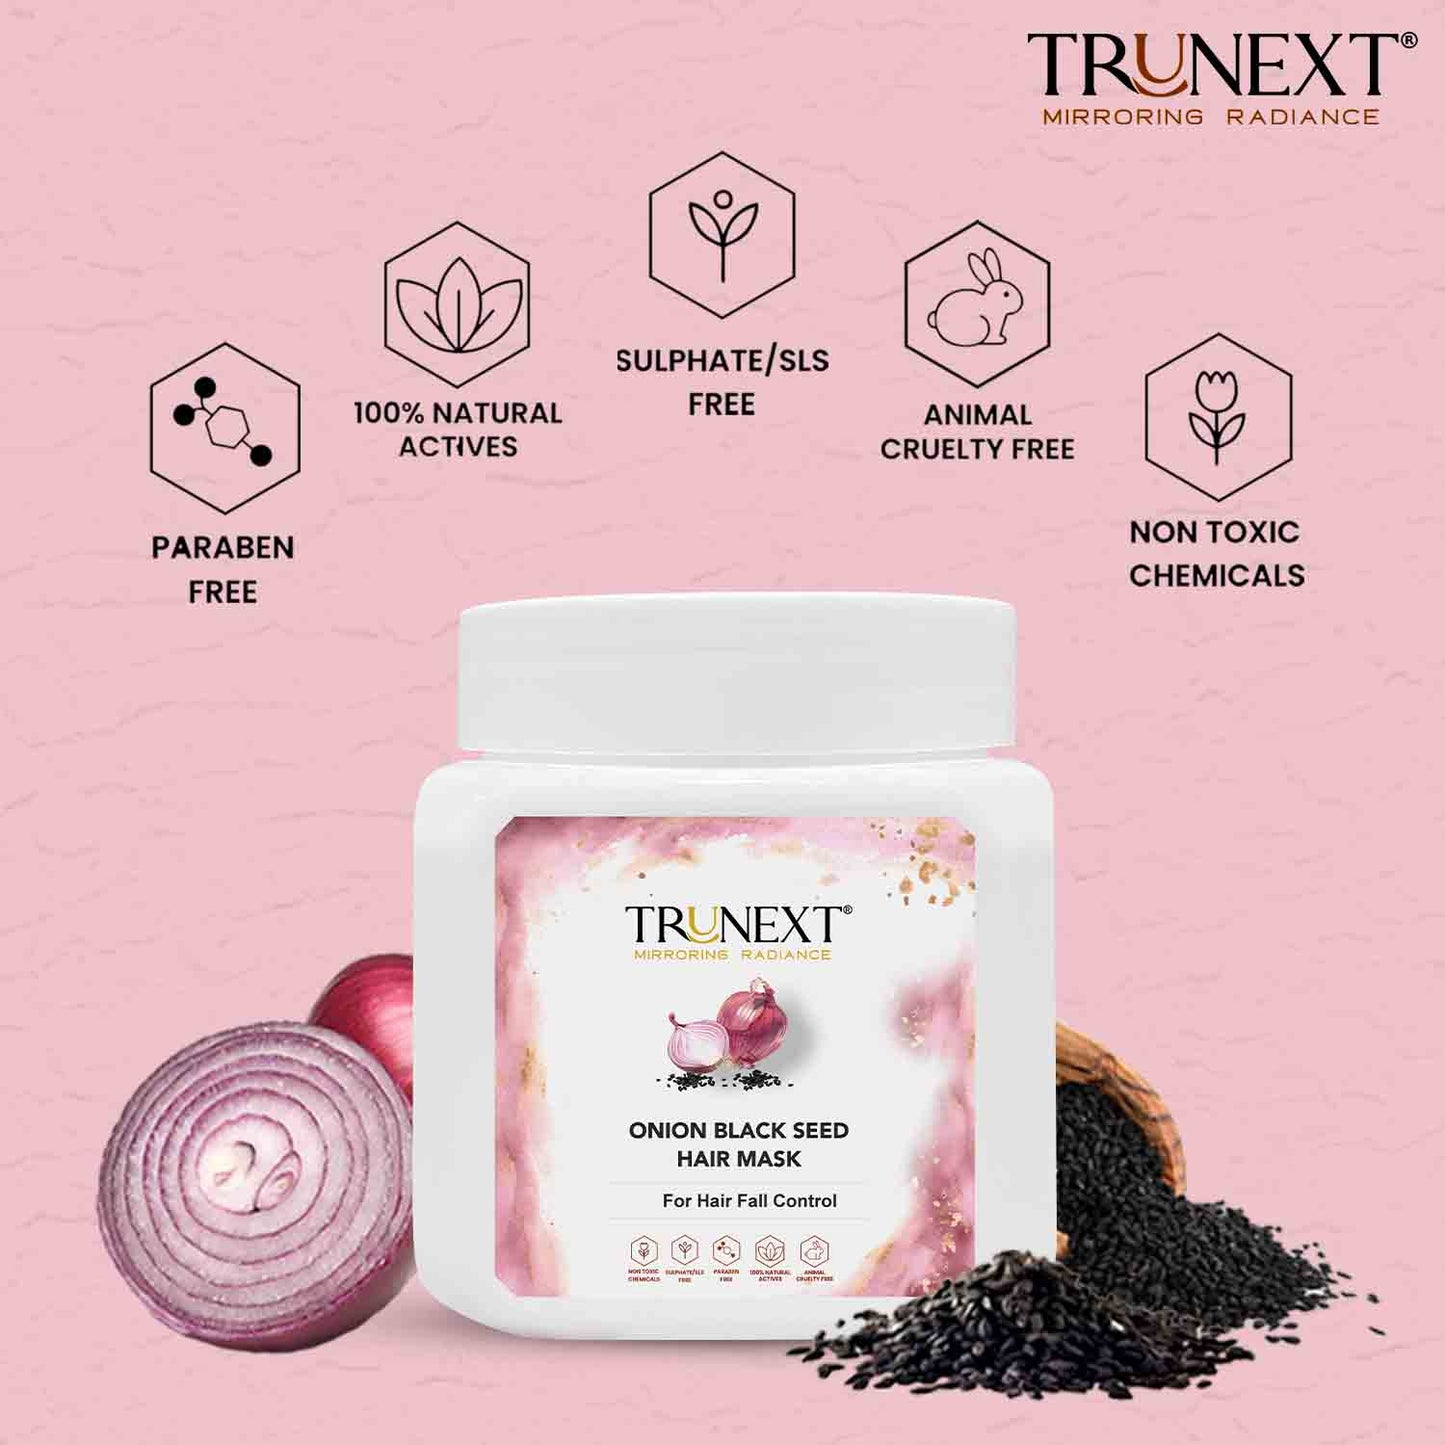 Onion Black Seed Hair Mask (200 ml) For Prevents Hair Loss